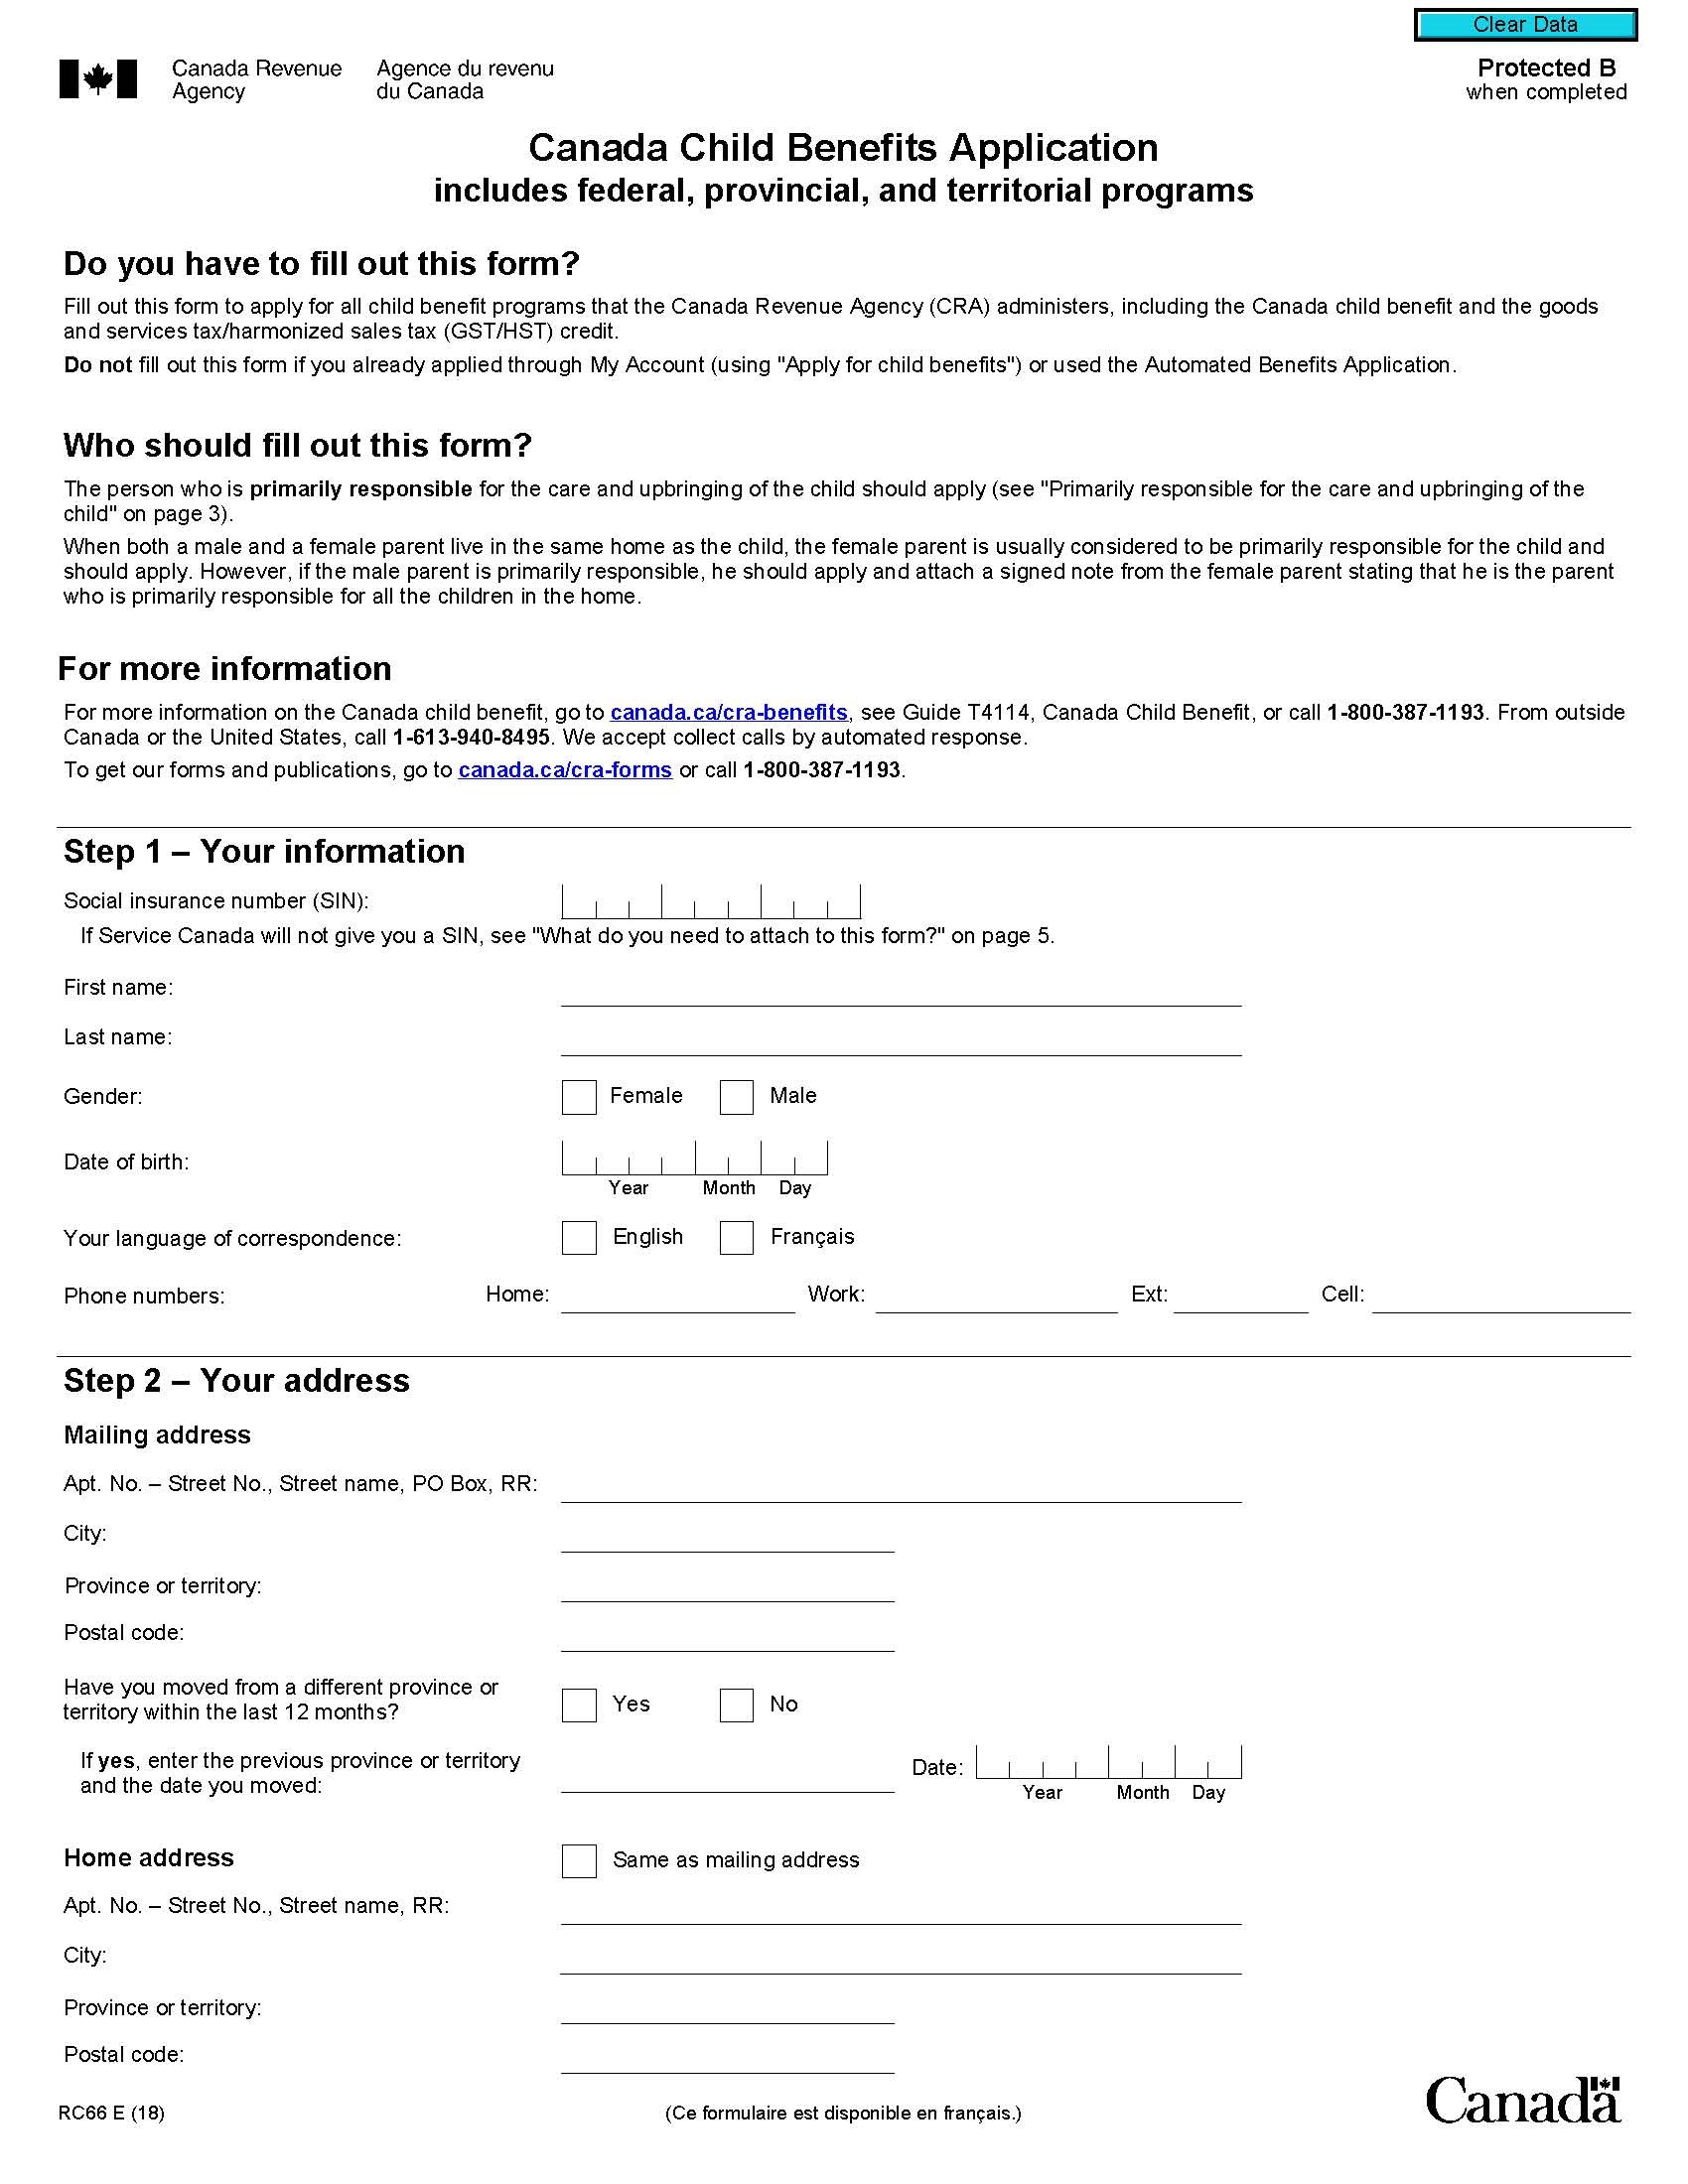 page 1 of Canada Child Benefit Application Form (RC66)